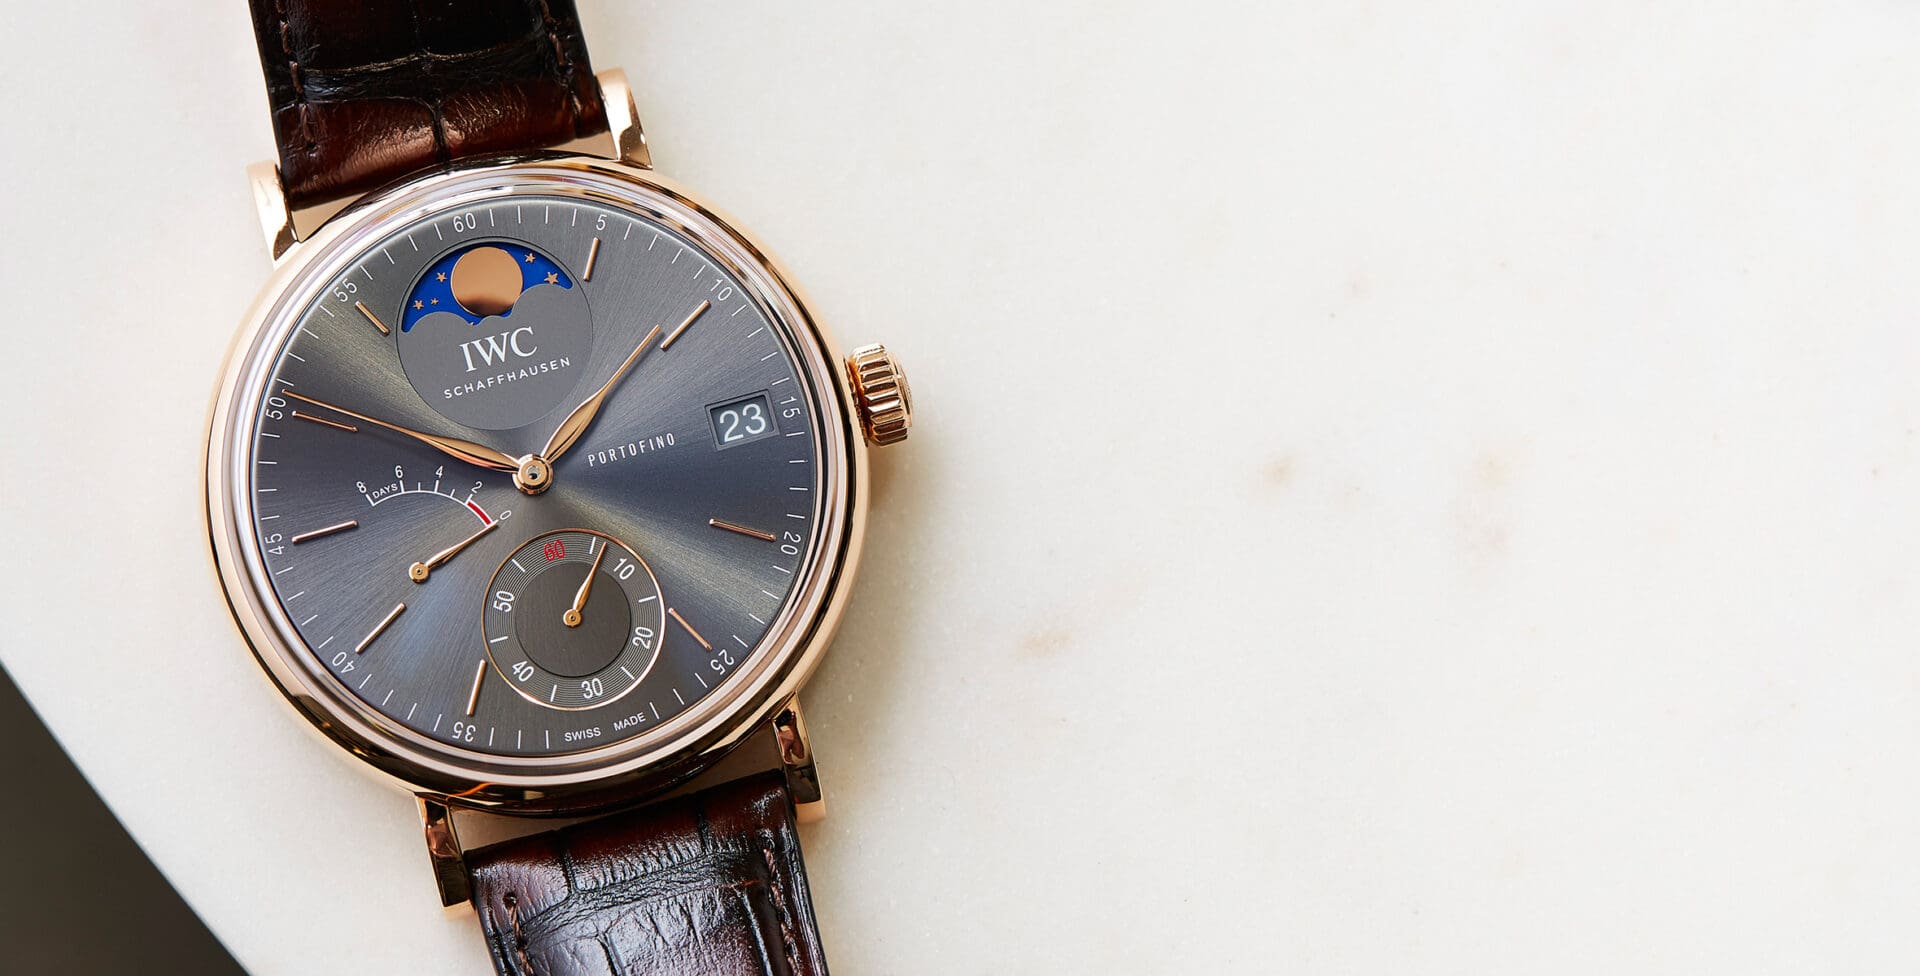 HANDS-ON: Big-hearted – the IWC Portofino Hand-Wound Moon Phase